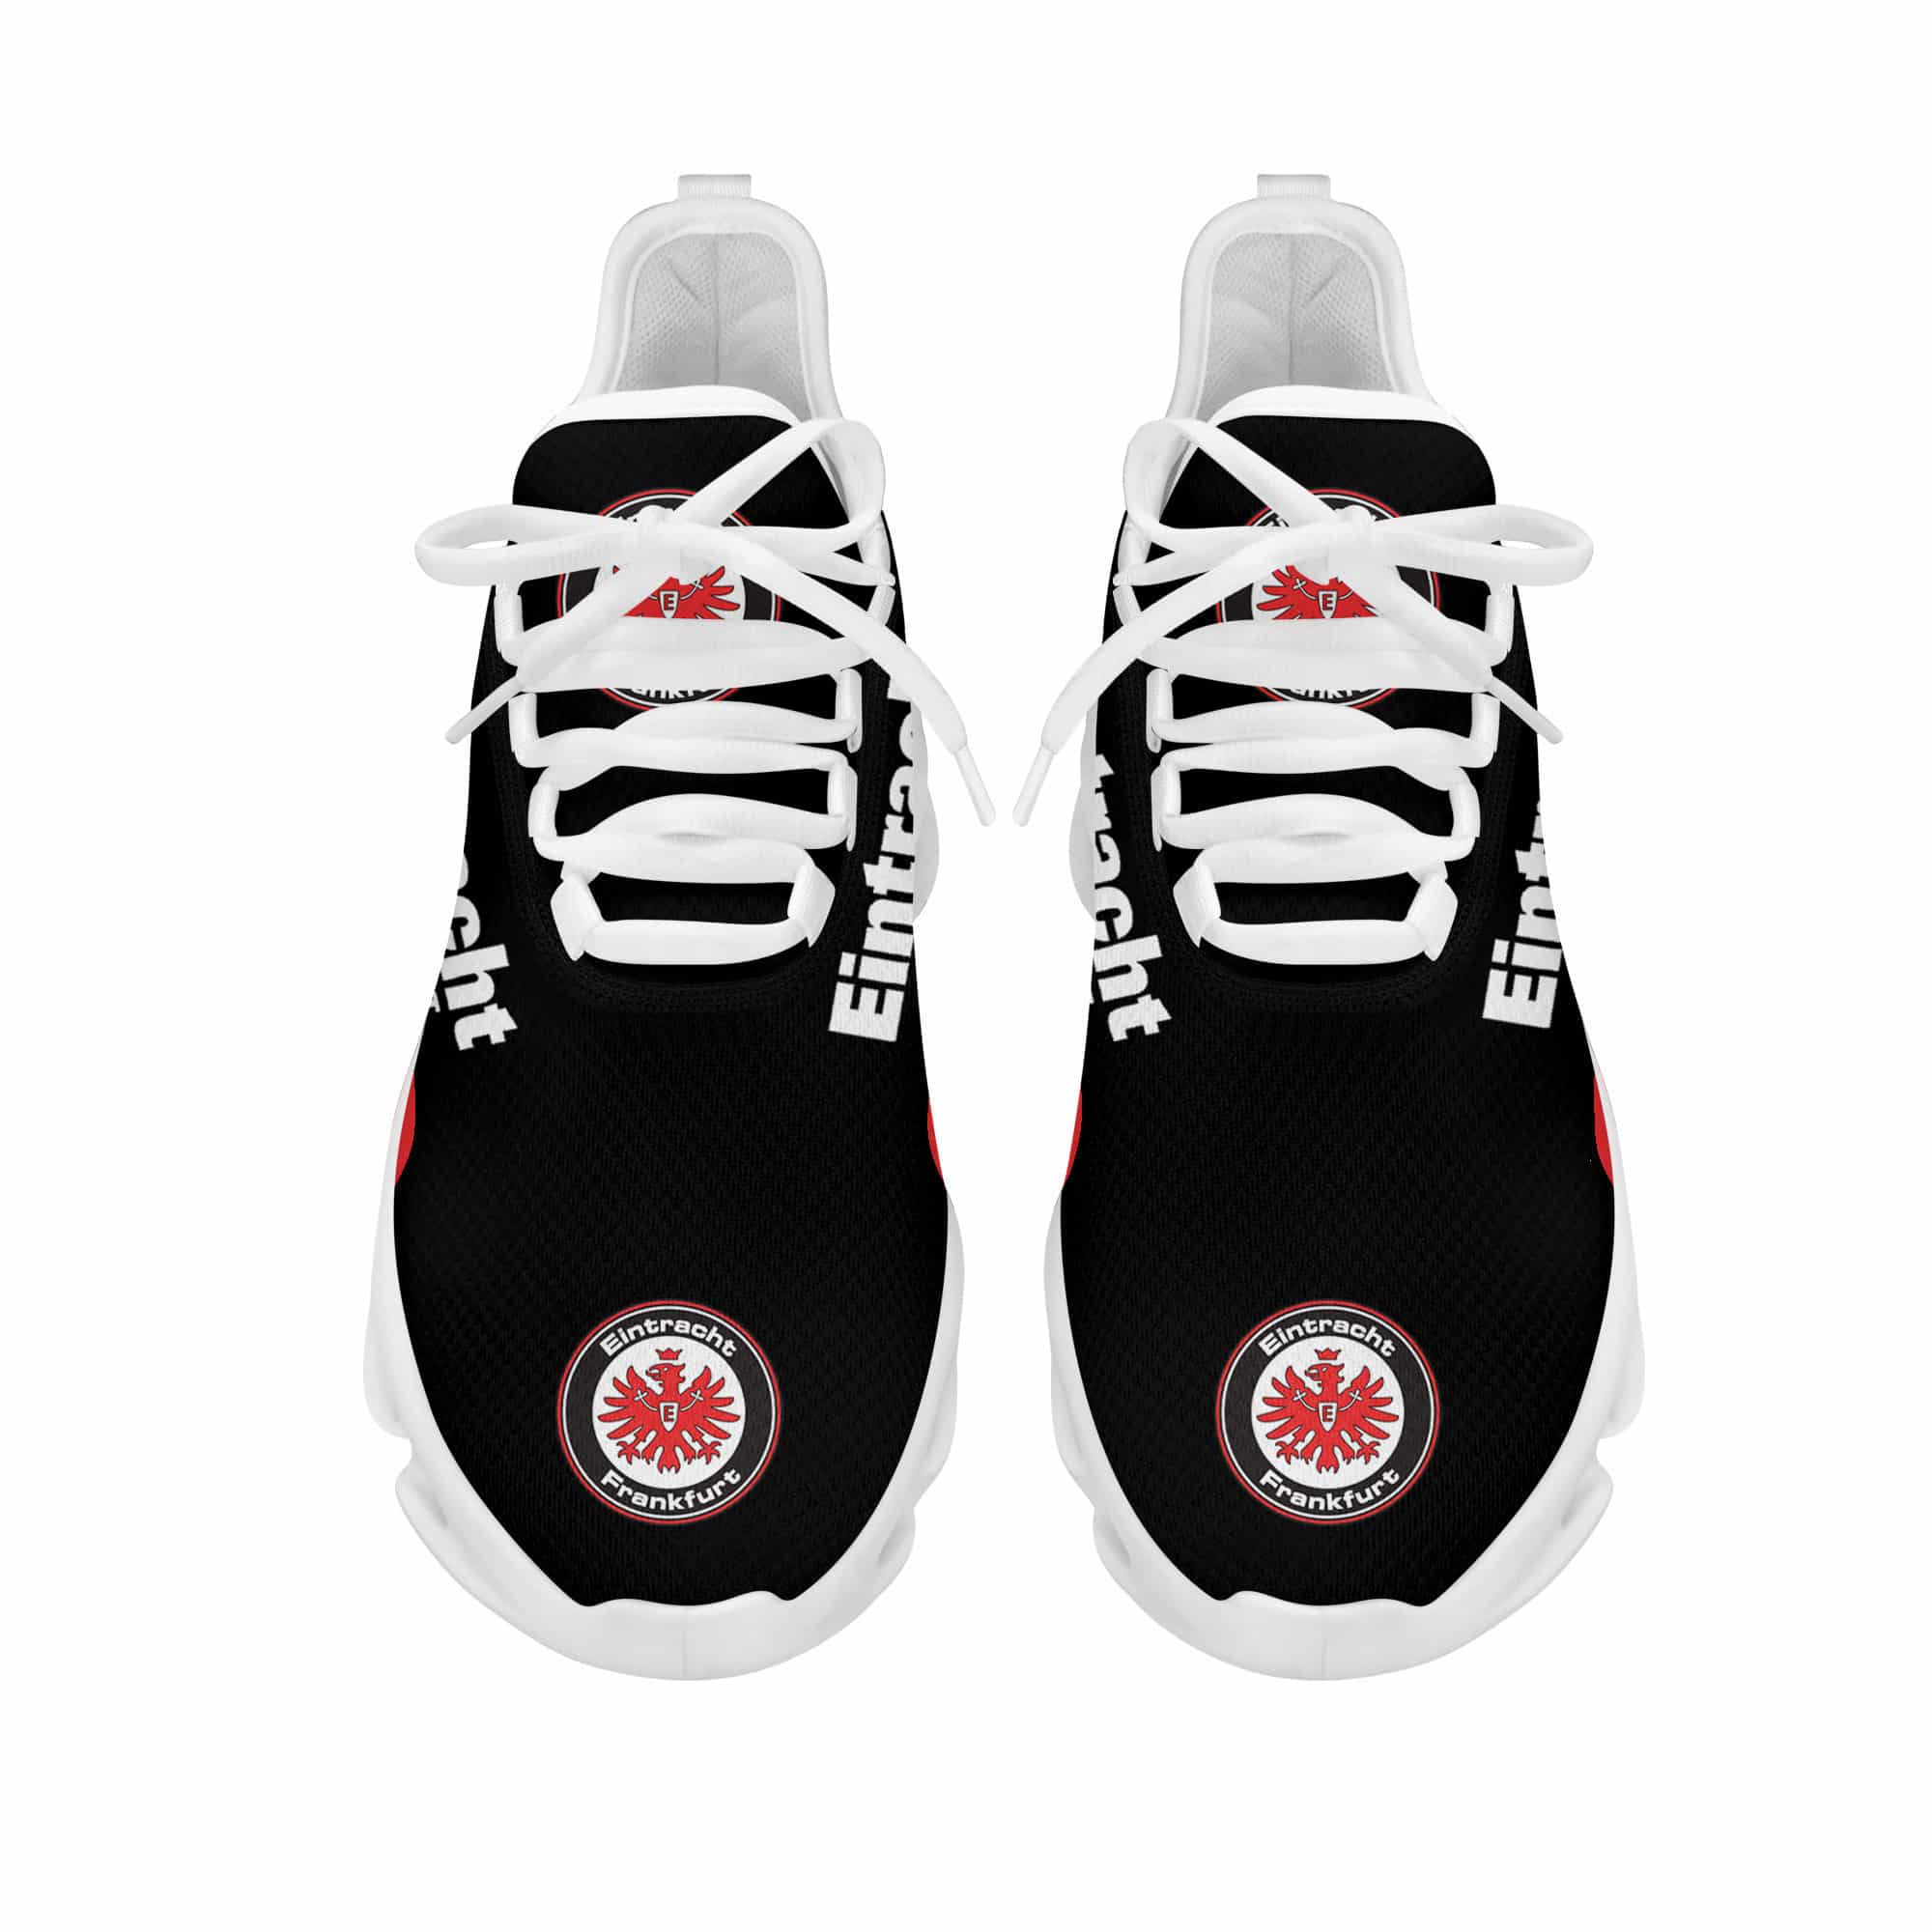 Eintracht Frankfurt Running Shoes Max Soul Shoes Sneakers Ver 2 4